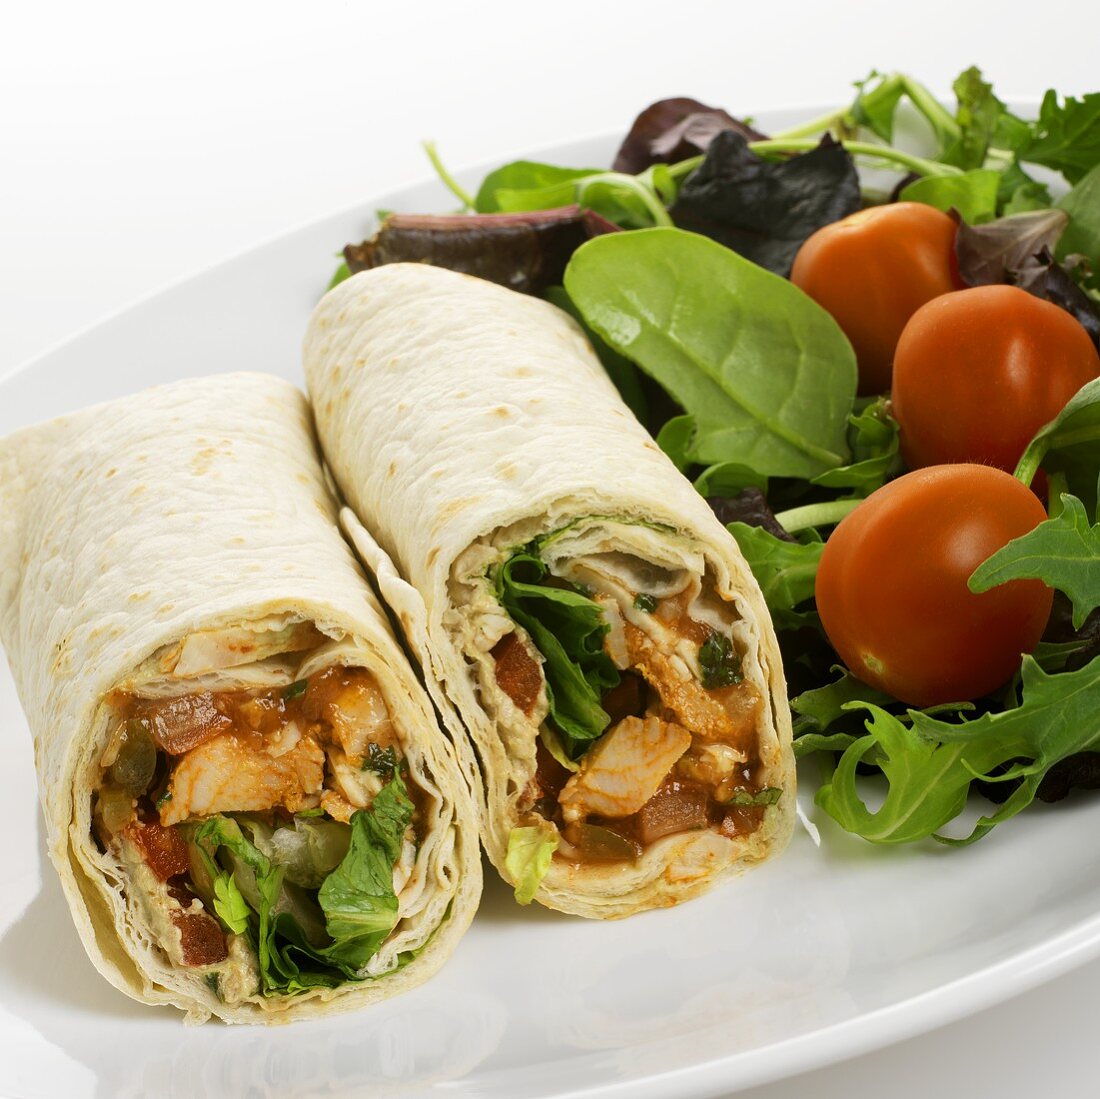 Chicken and tomato wrap with salad on a plate